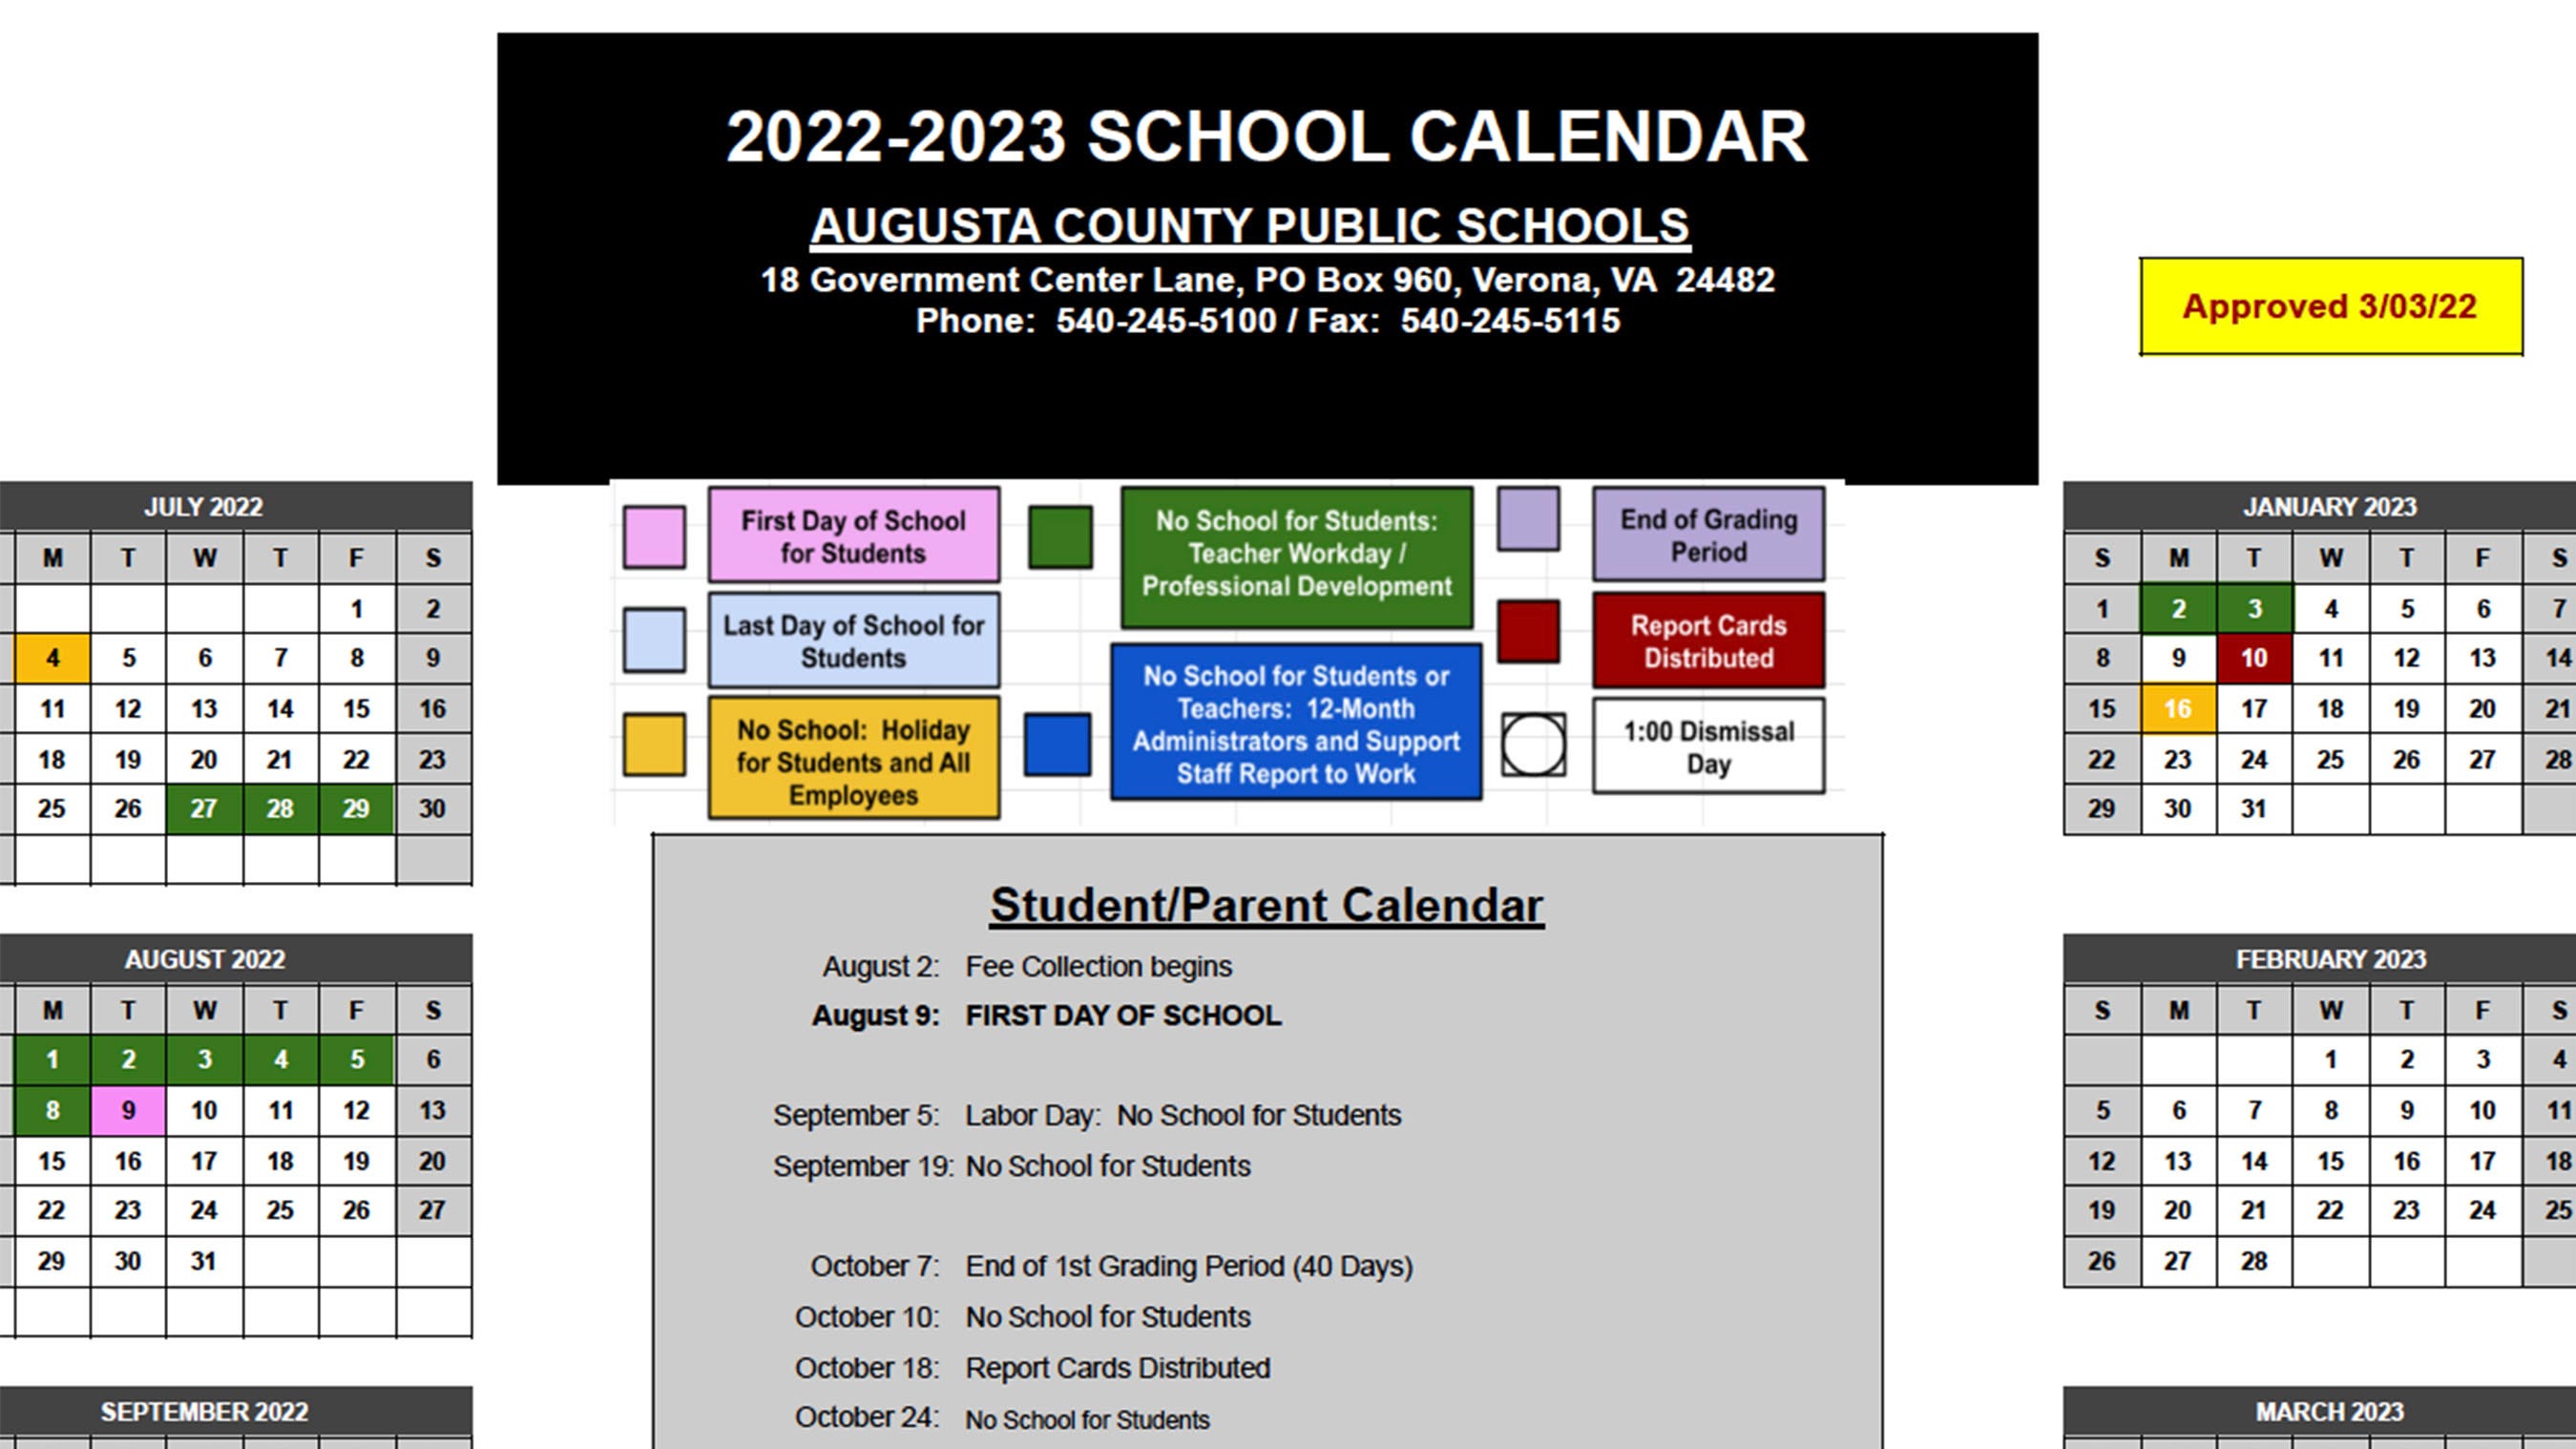 Augusta County approves school calendar for 2022 2023 academic year